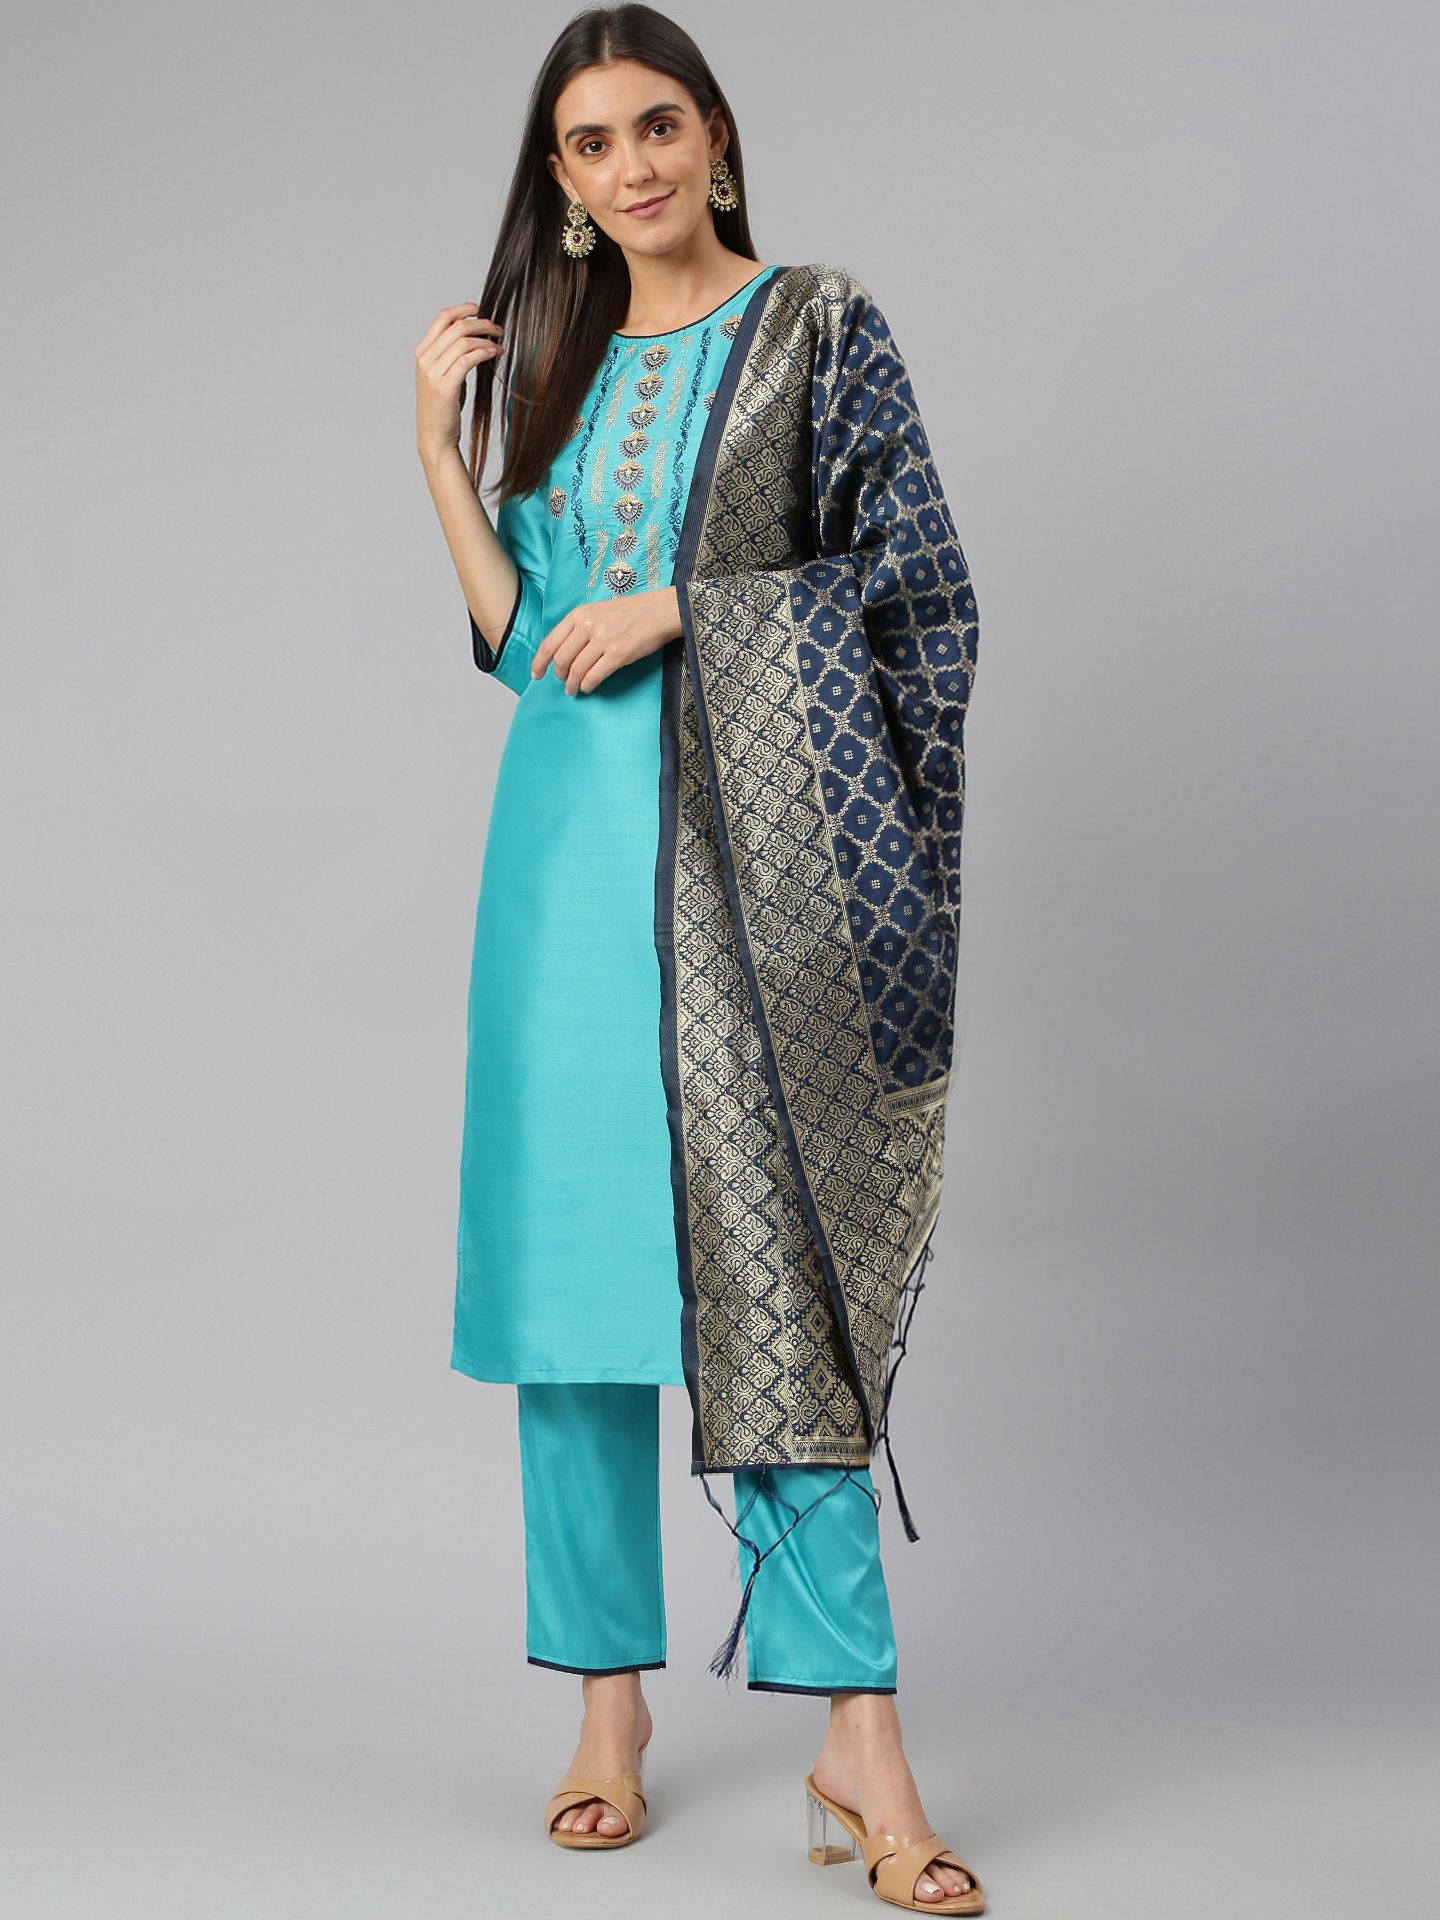 Picture of Sky Blue Slub Silk Blend Thread Embroidery Work on Top with Jacquard Dupatta Stitched Salwar Kameez